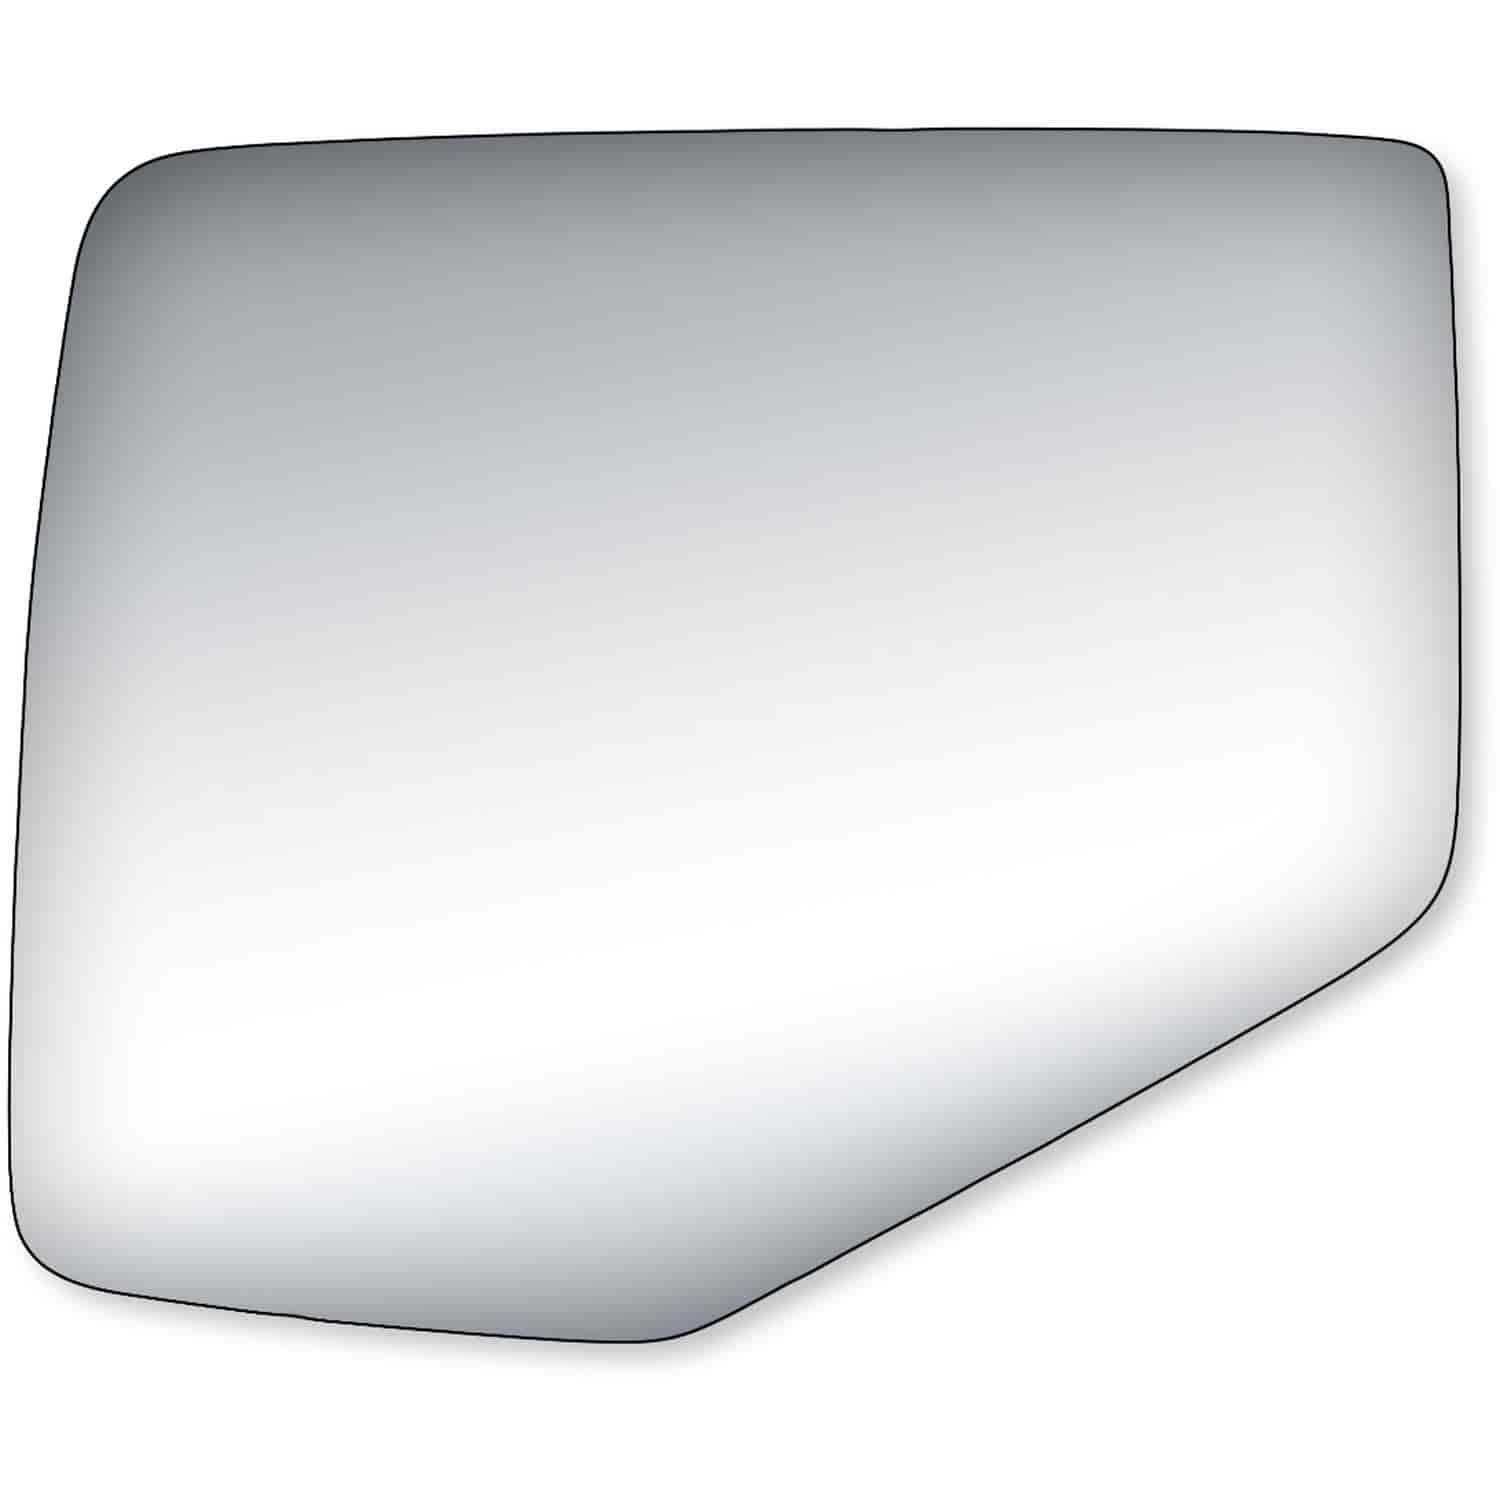 Replacement Glass for 06-10 Explorer; 07-10 Explorer Sport Trac; 06-11 Ranger; 06-10 Mountaineer the